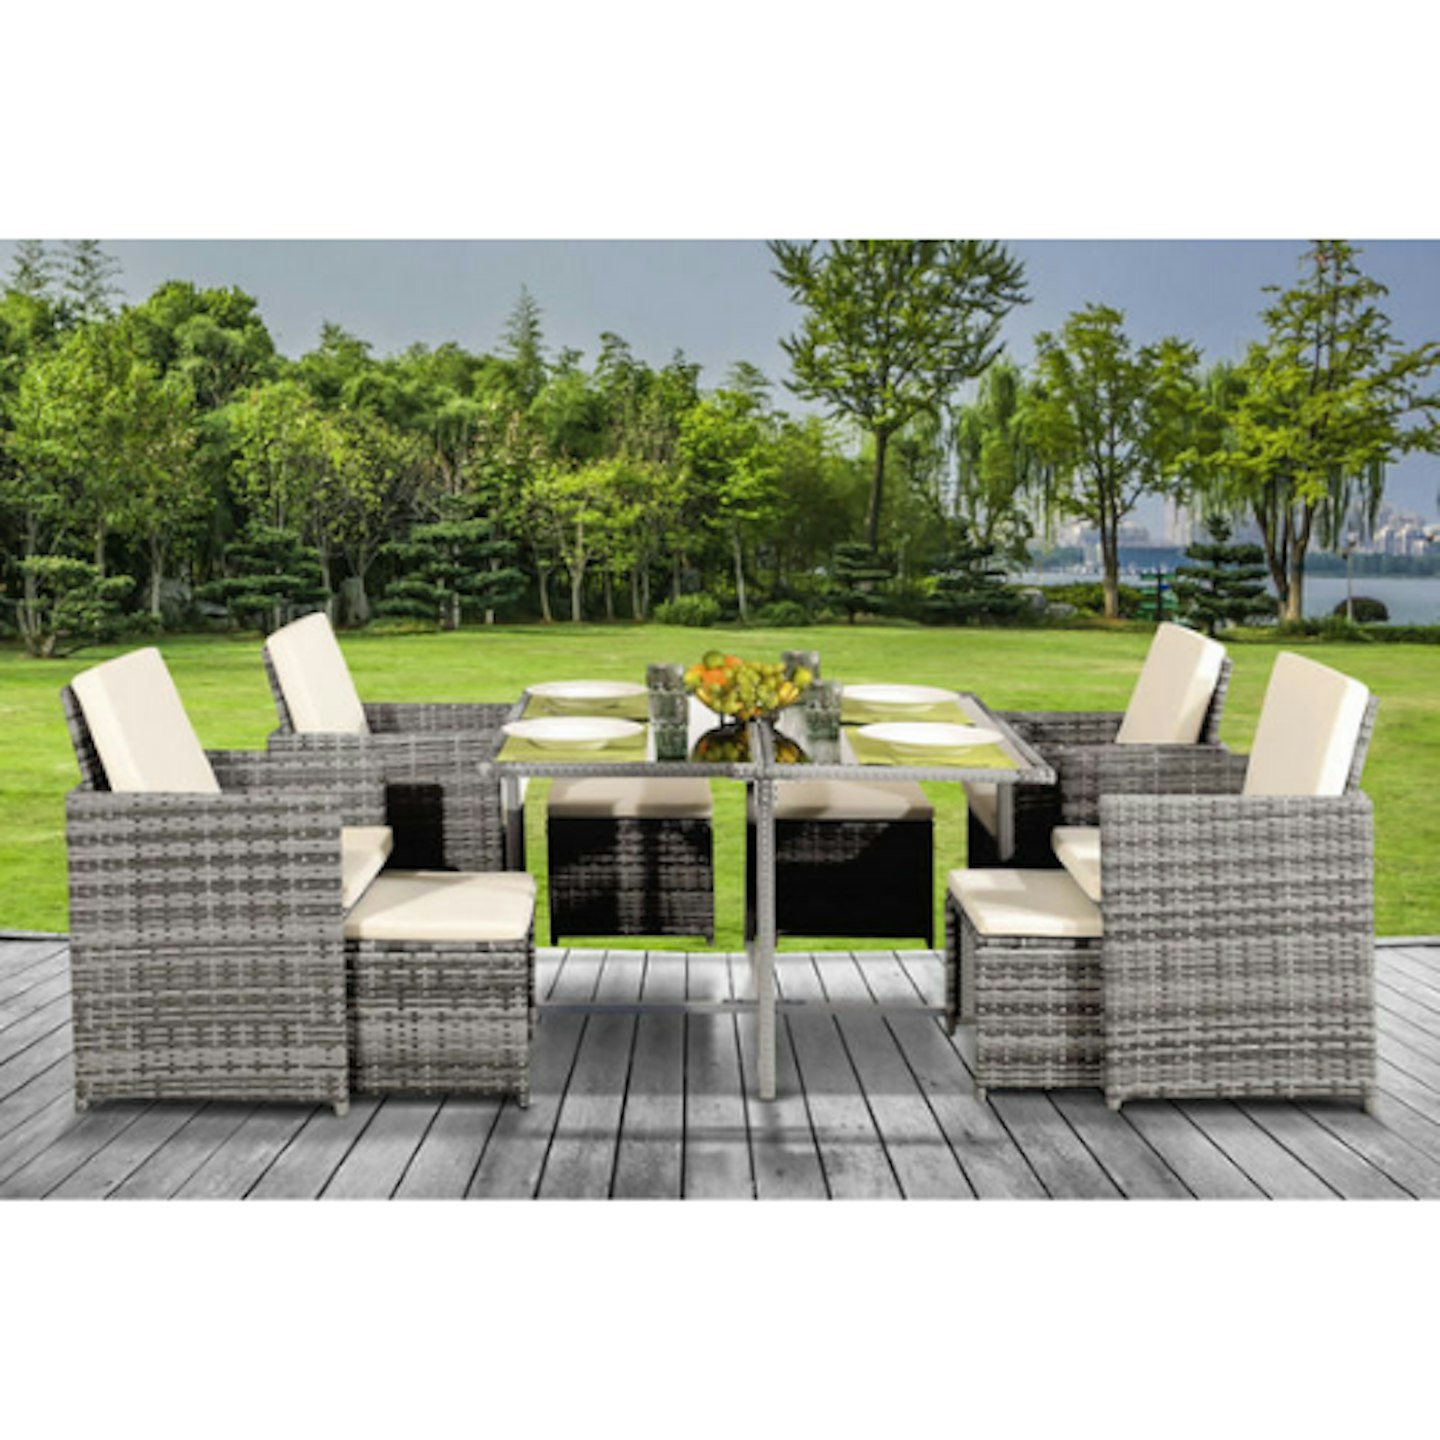 8-Seater Rattan Dining Set with Optional Cover